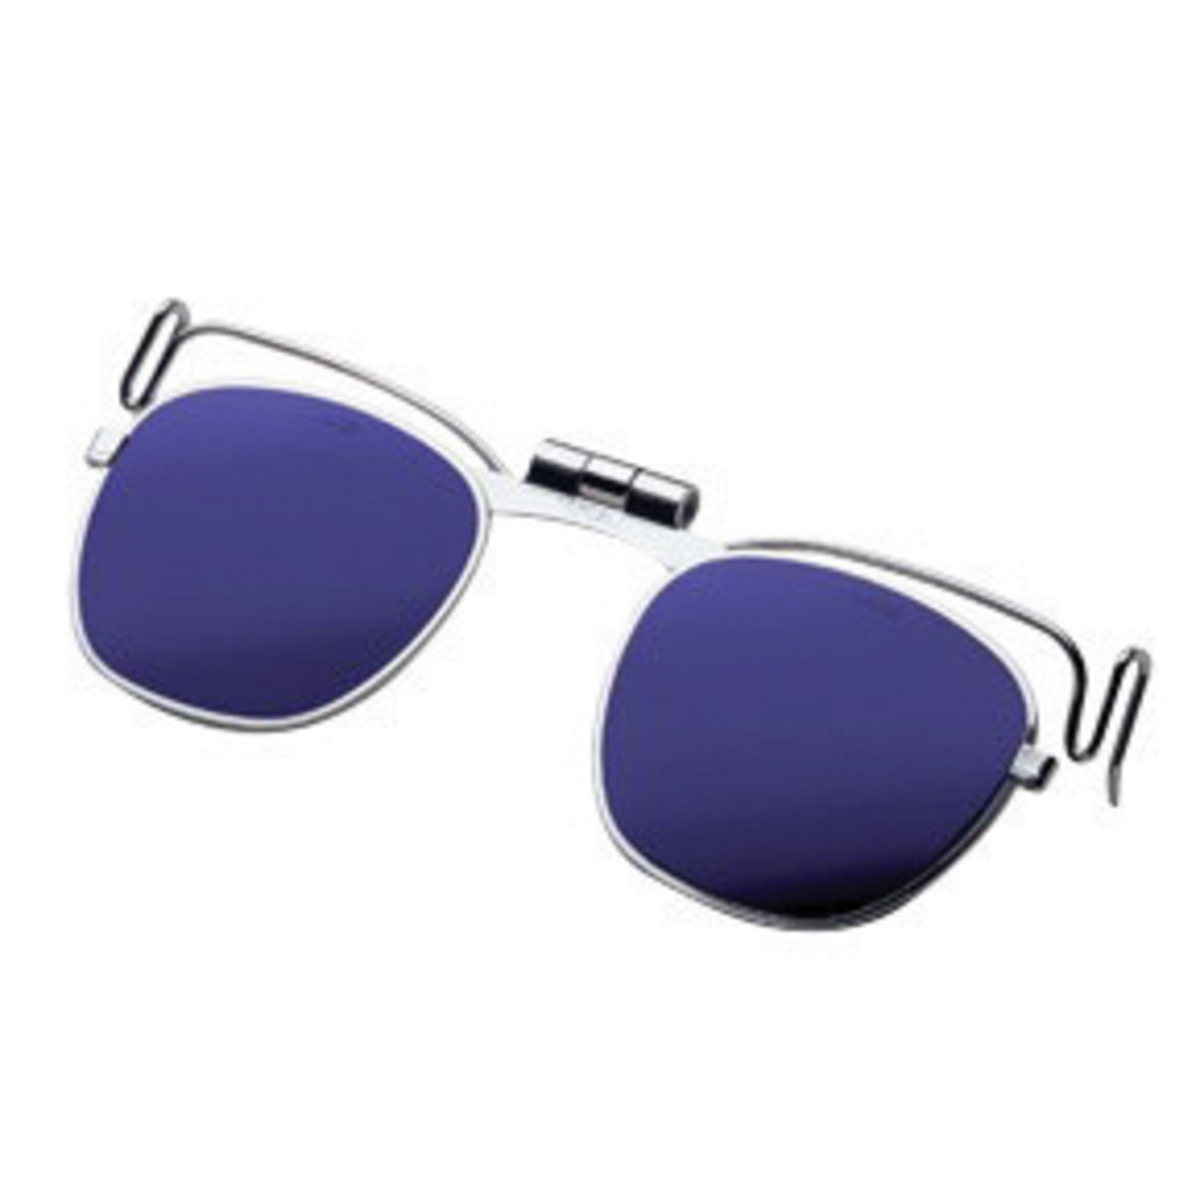 Cobalt Blue Glass Clip-On Flip-Up Spectacles Full Lens To Fit On Hard Hats